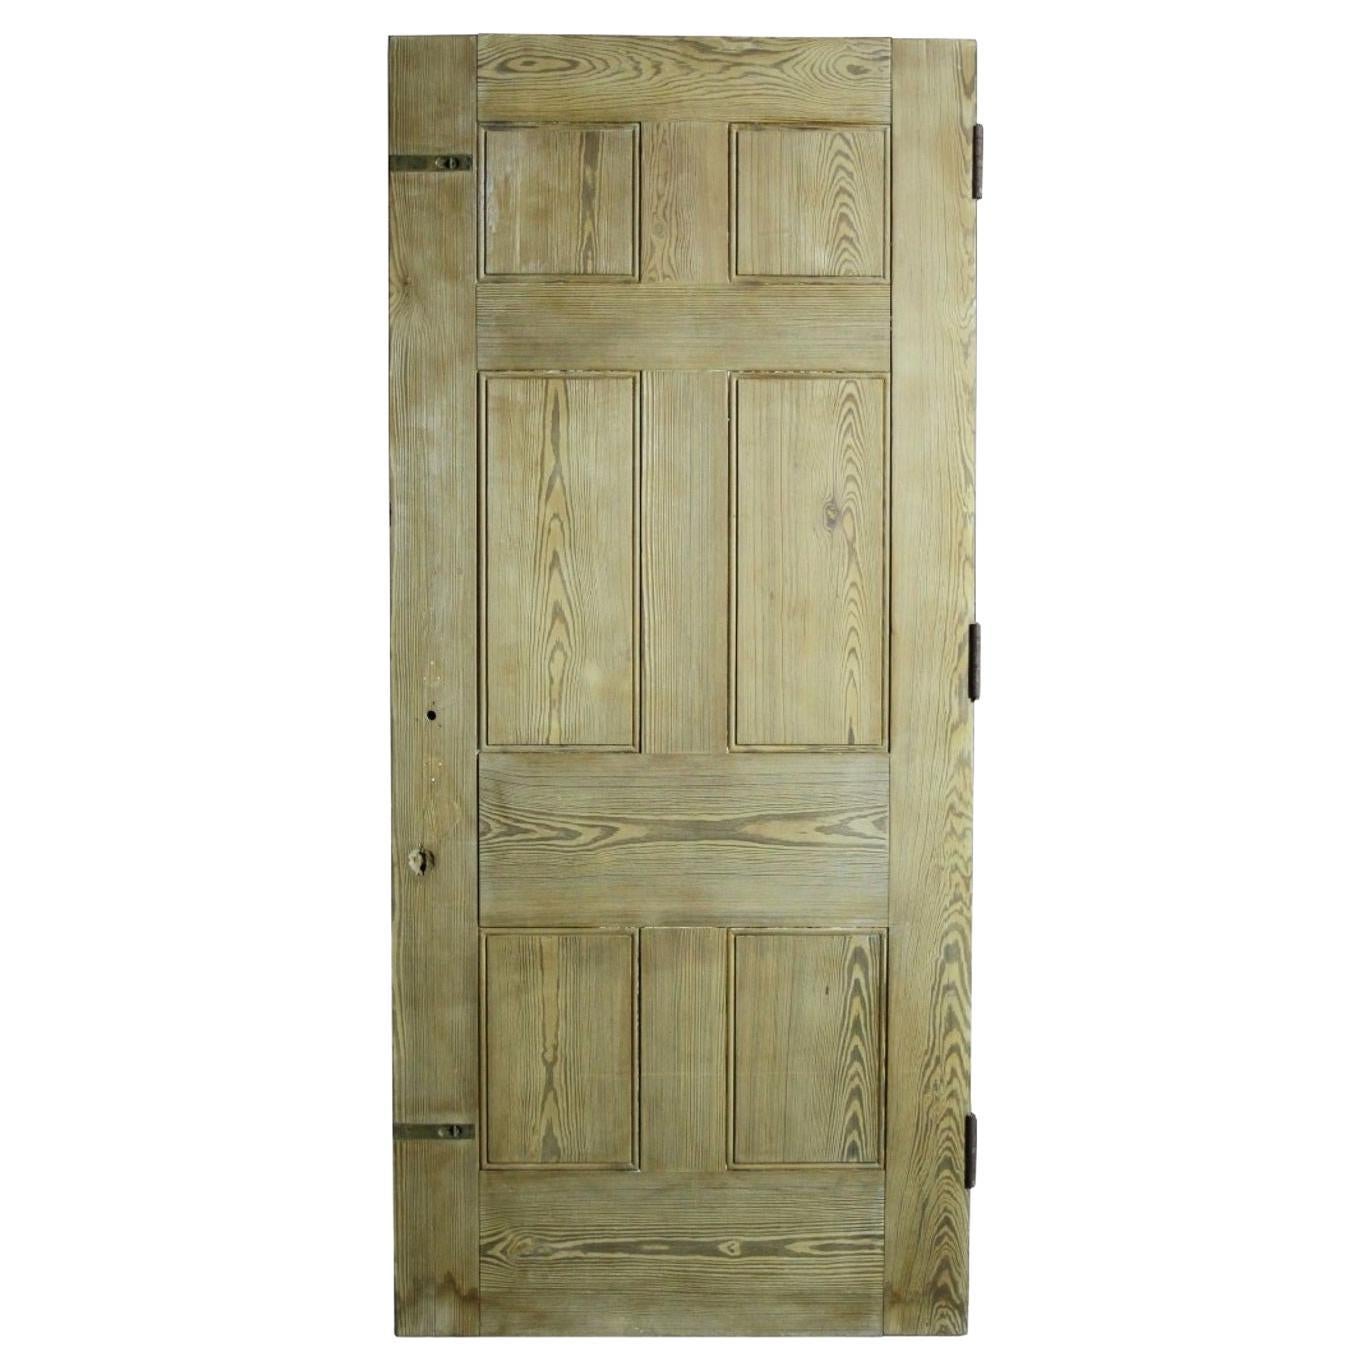 A Reclaimed Six Panel Interior or Exterior Pine Door (12 Available) For Sale